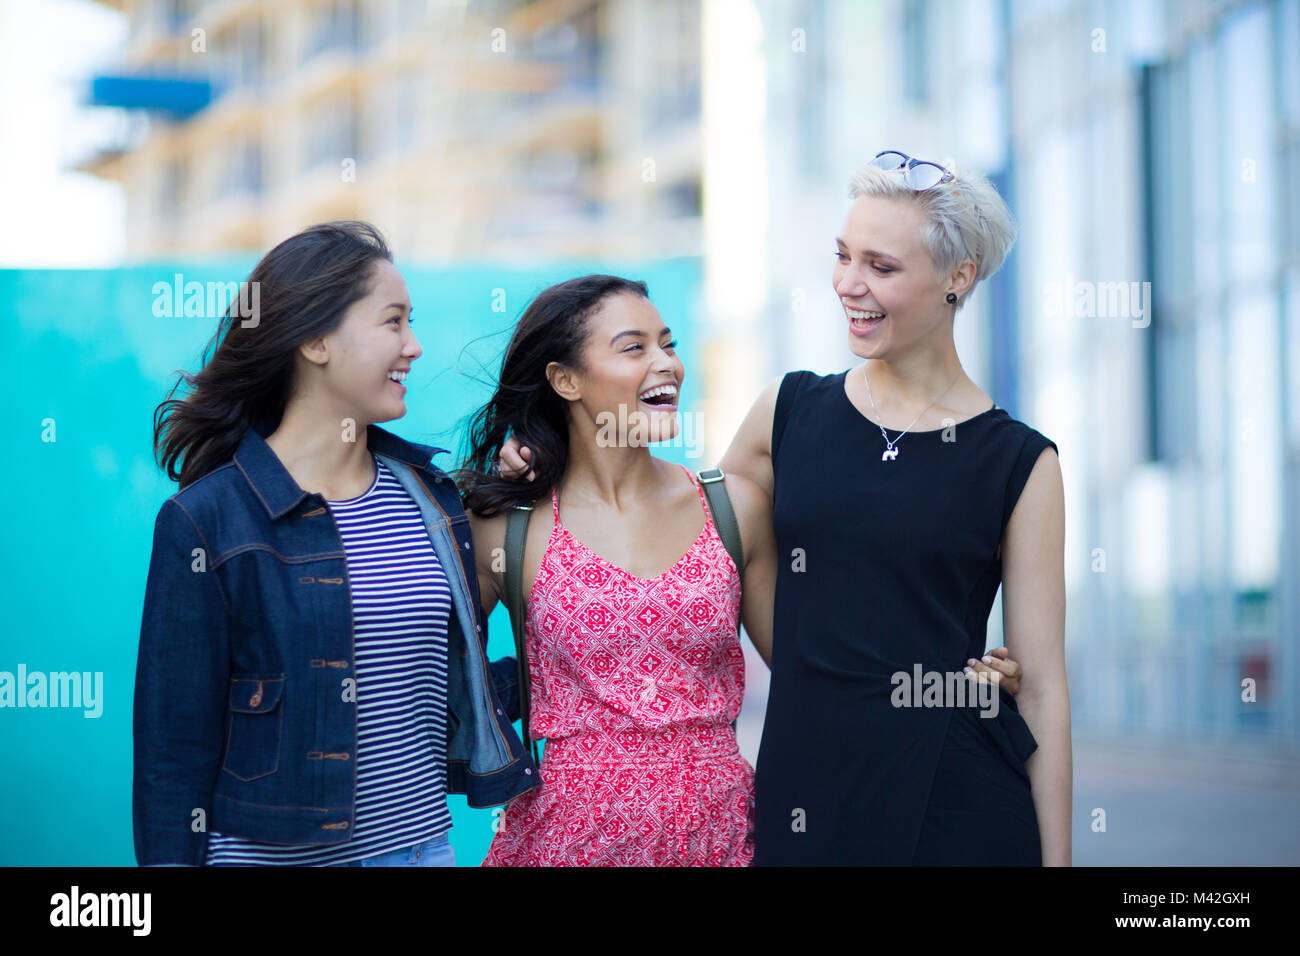 Young adults walking down a street together Stock Photo